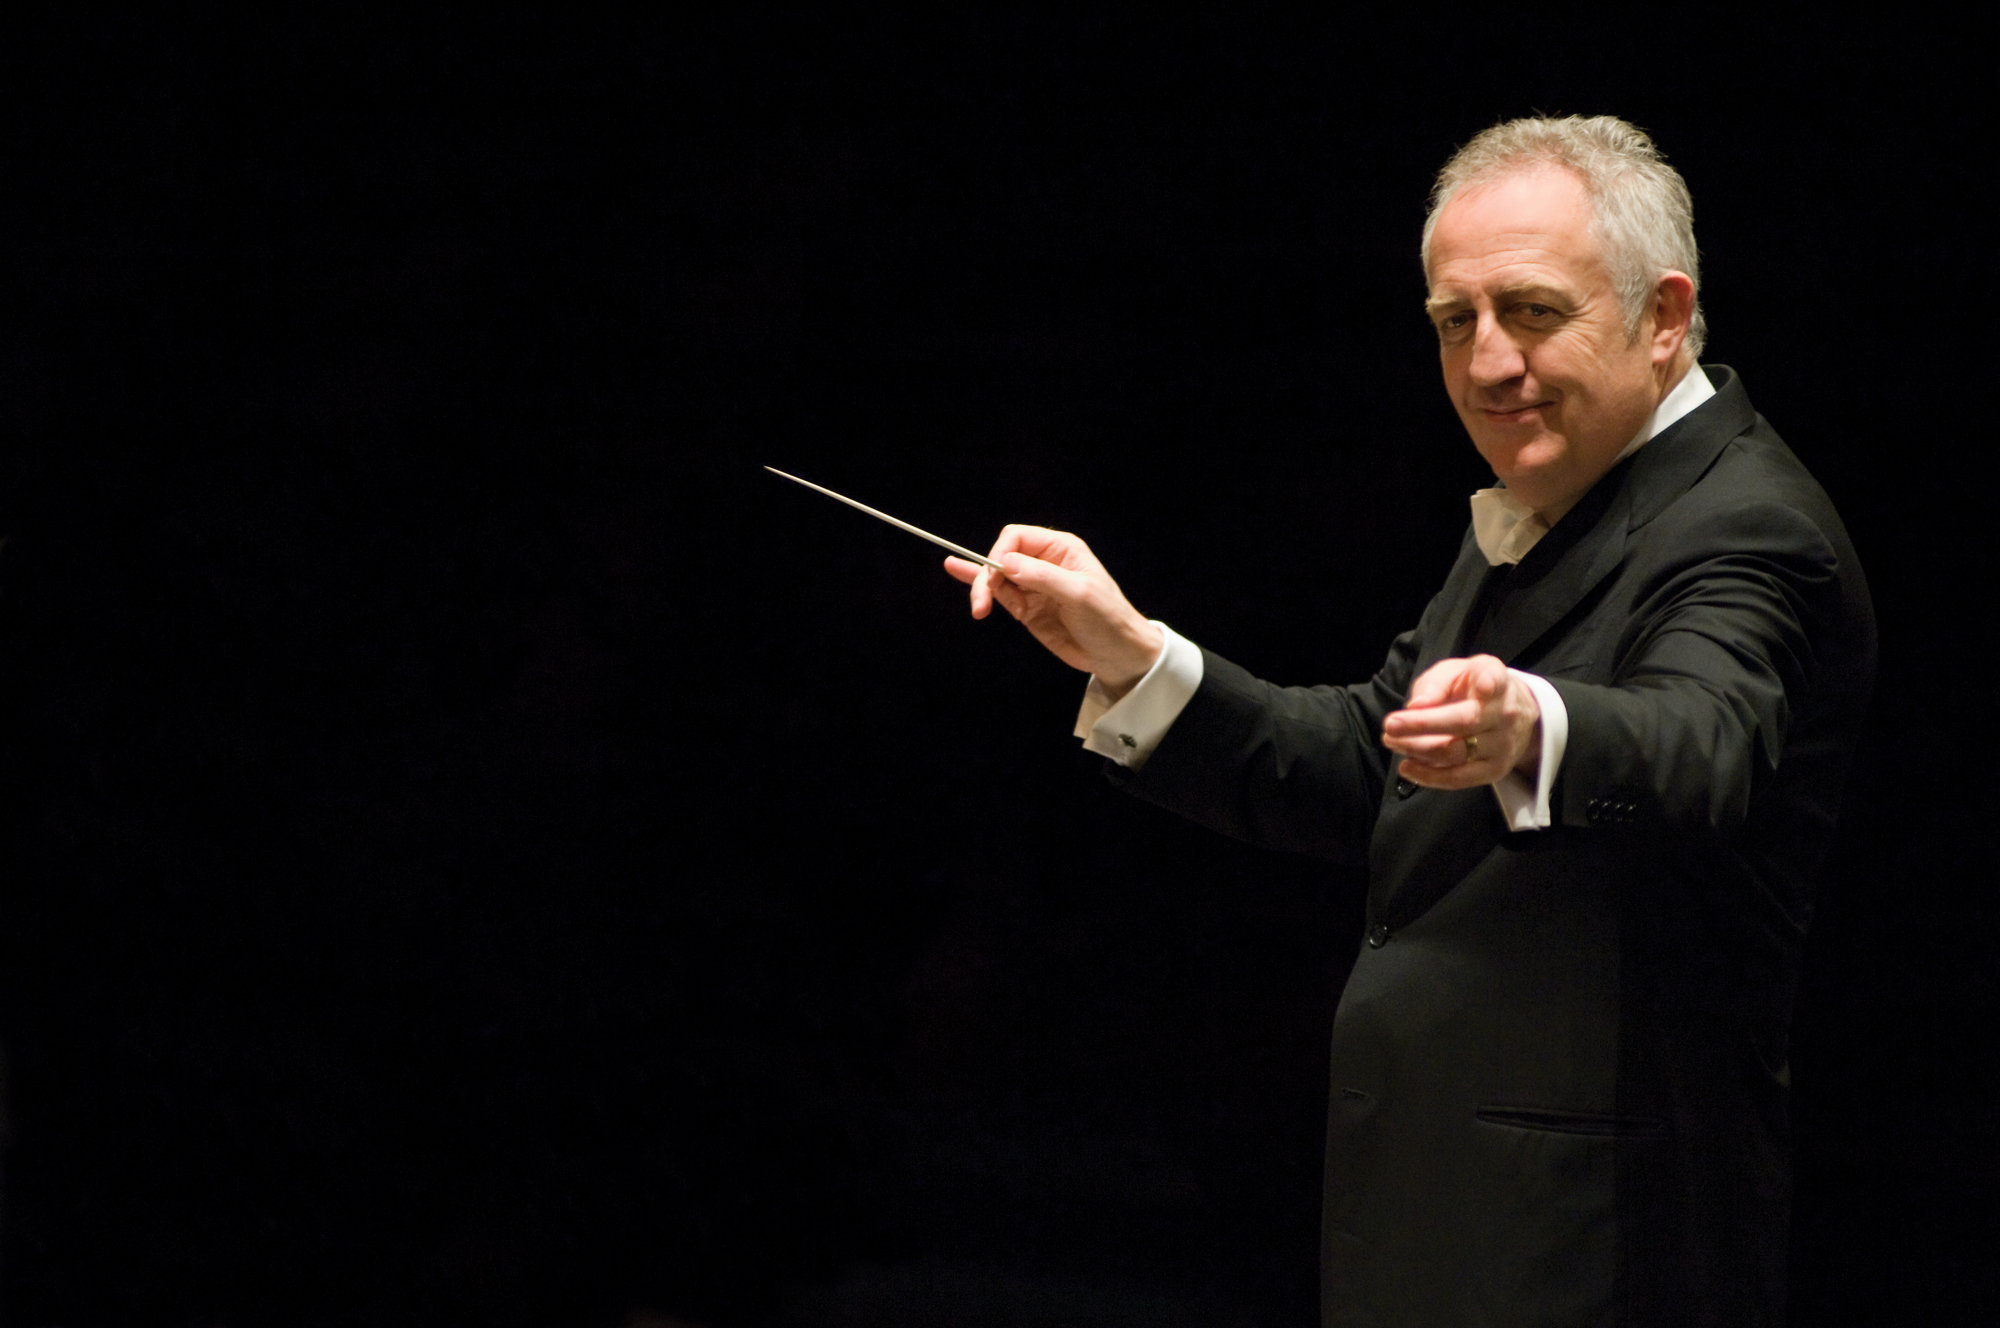 Bramwell Tovey is providing a sneak peek of what his tenure as Music Director might be like. (Courtesy Photo)